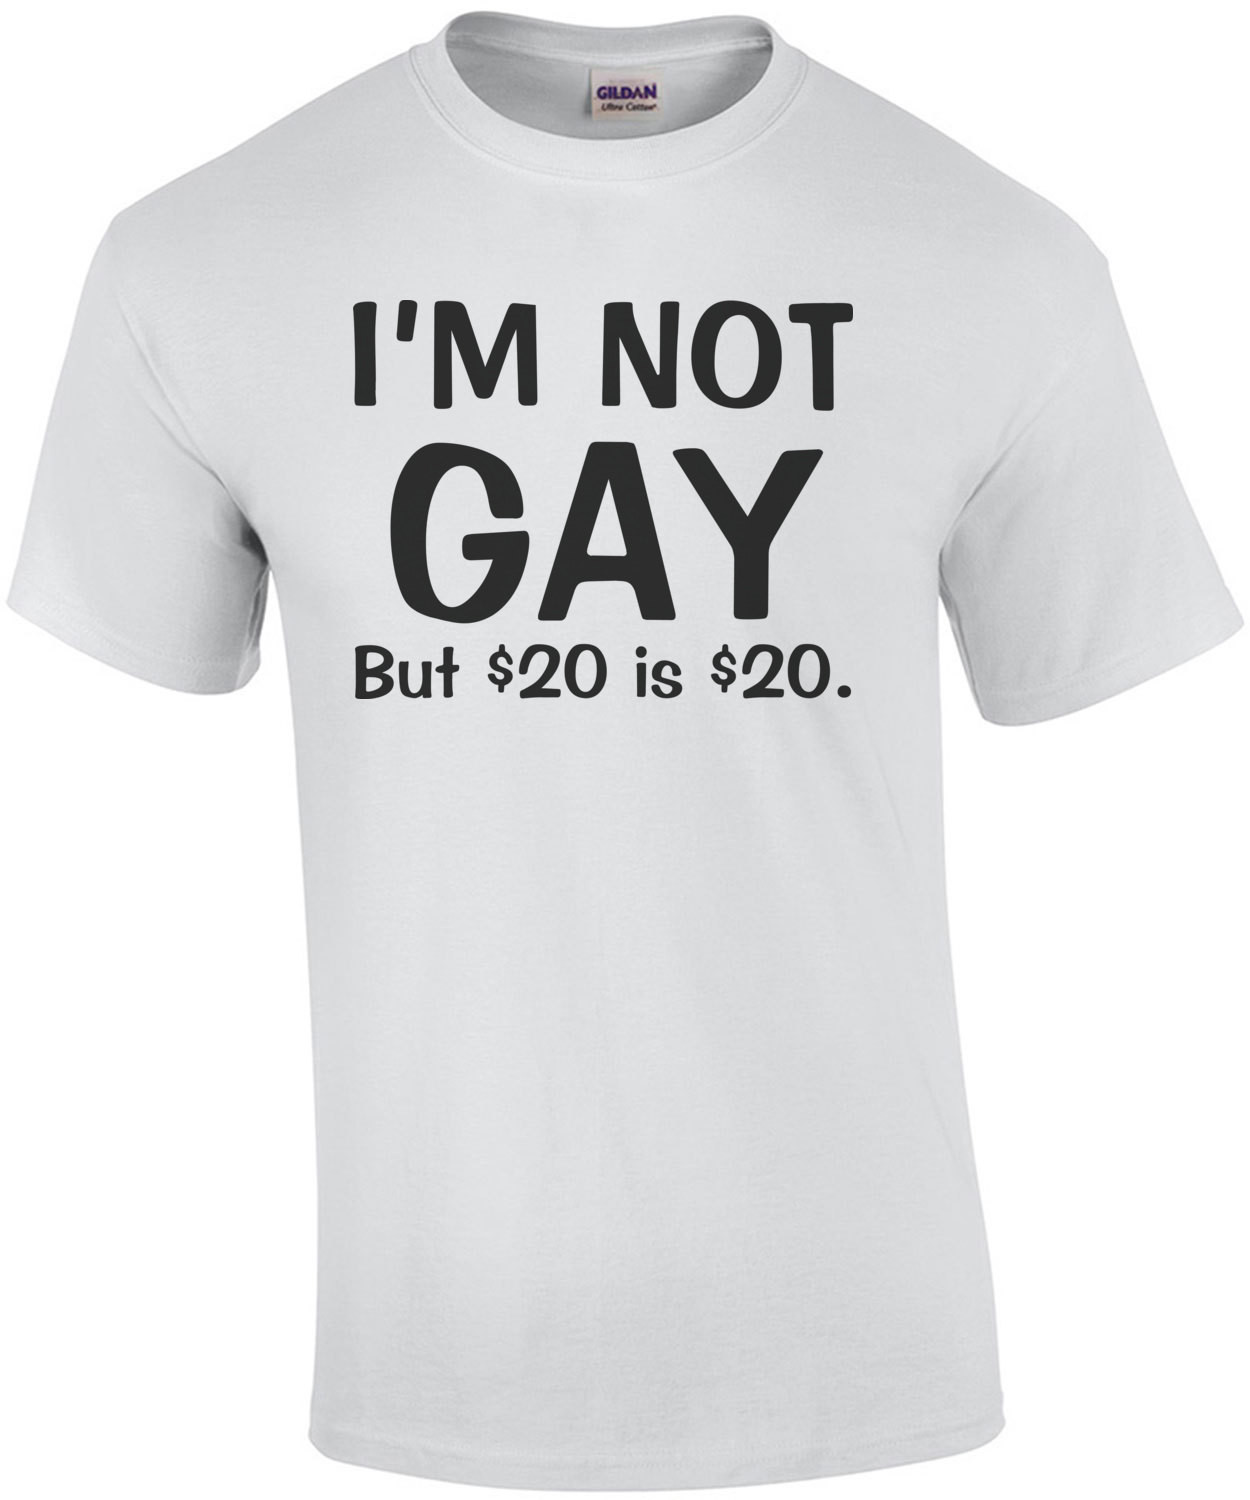 I'm Not Gay But $20 Is $20 Funny Shirt